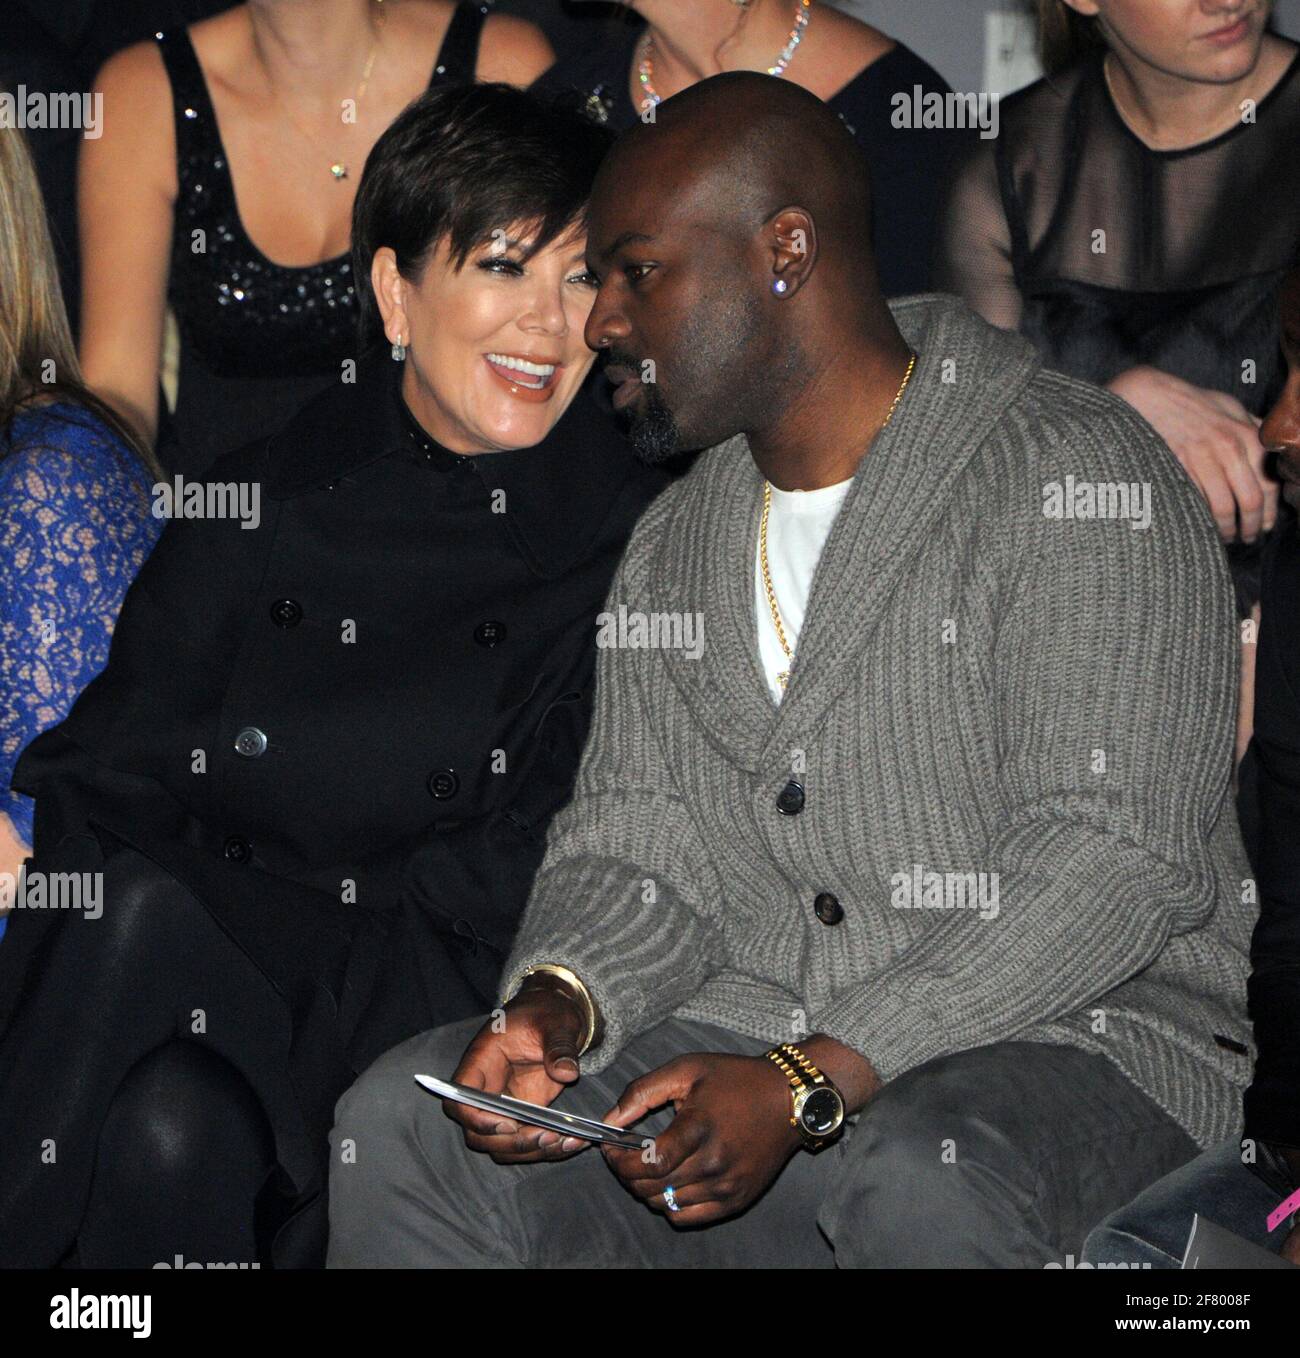 Kris Jenner, Corey Gamble on the runway during the 2015 Victoria's Secret Fashion Show, held at the Lexington Avenue Armory, Tuesday, November 10, 2015 in New York City. Photo by Jennifer Graylock-Graylock.com 917-519-7666 Stock Photo